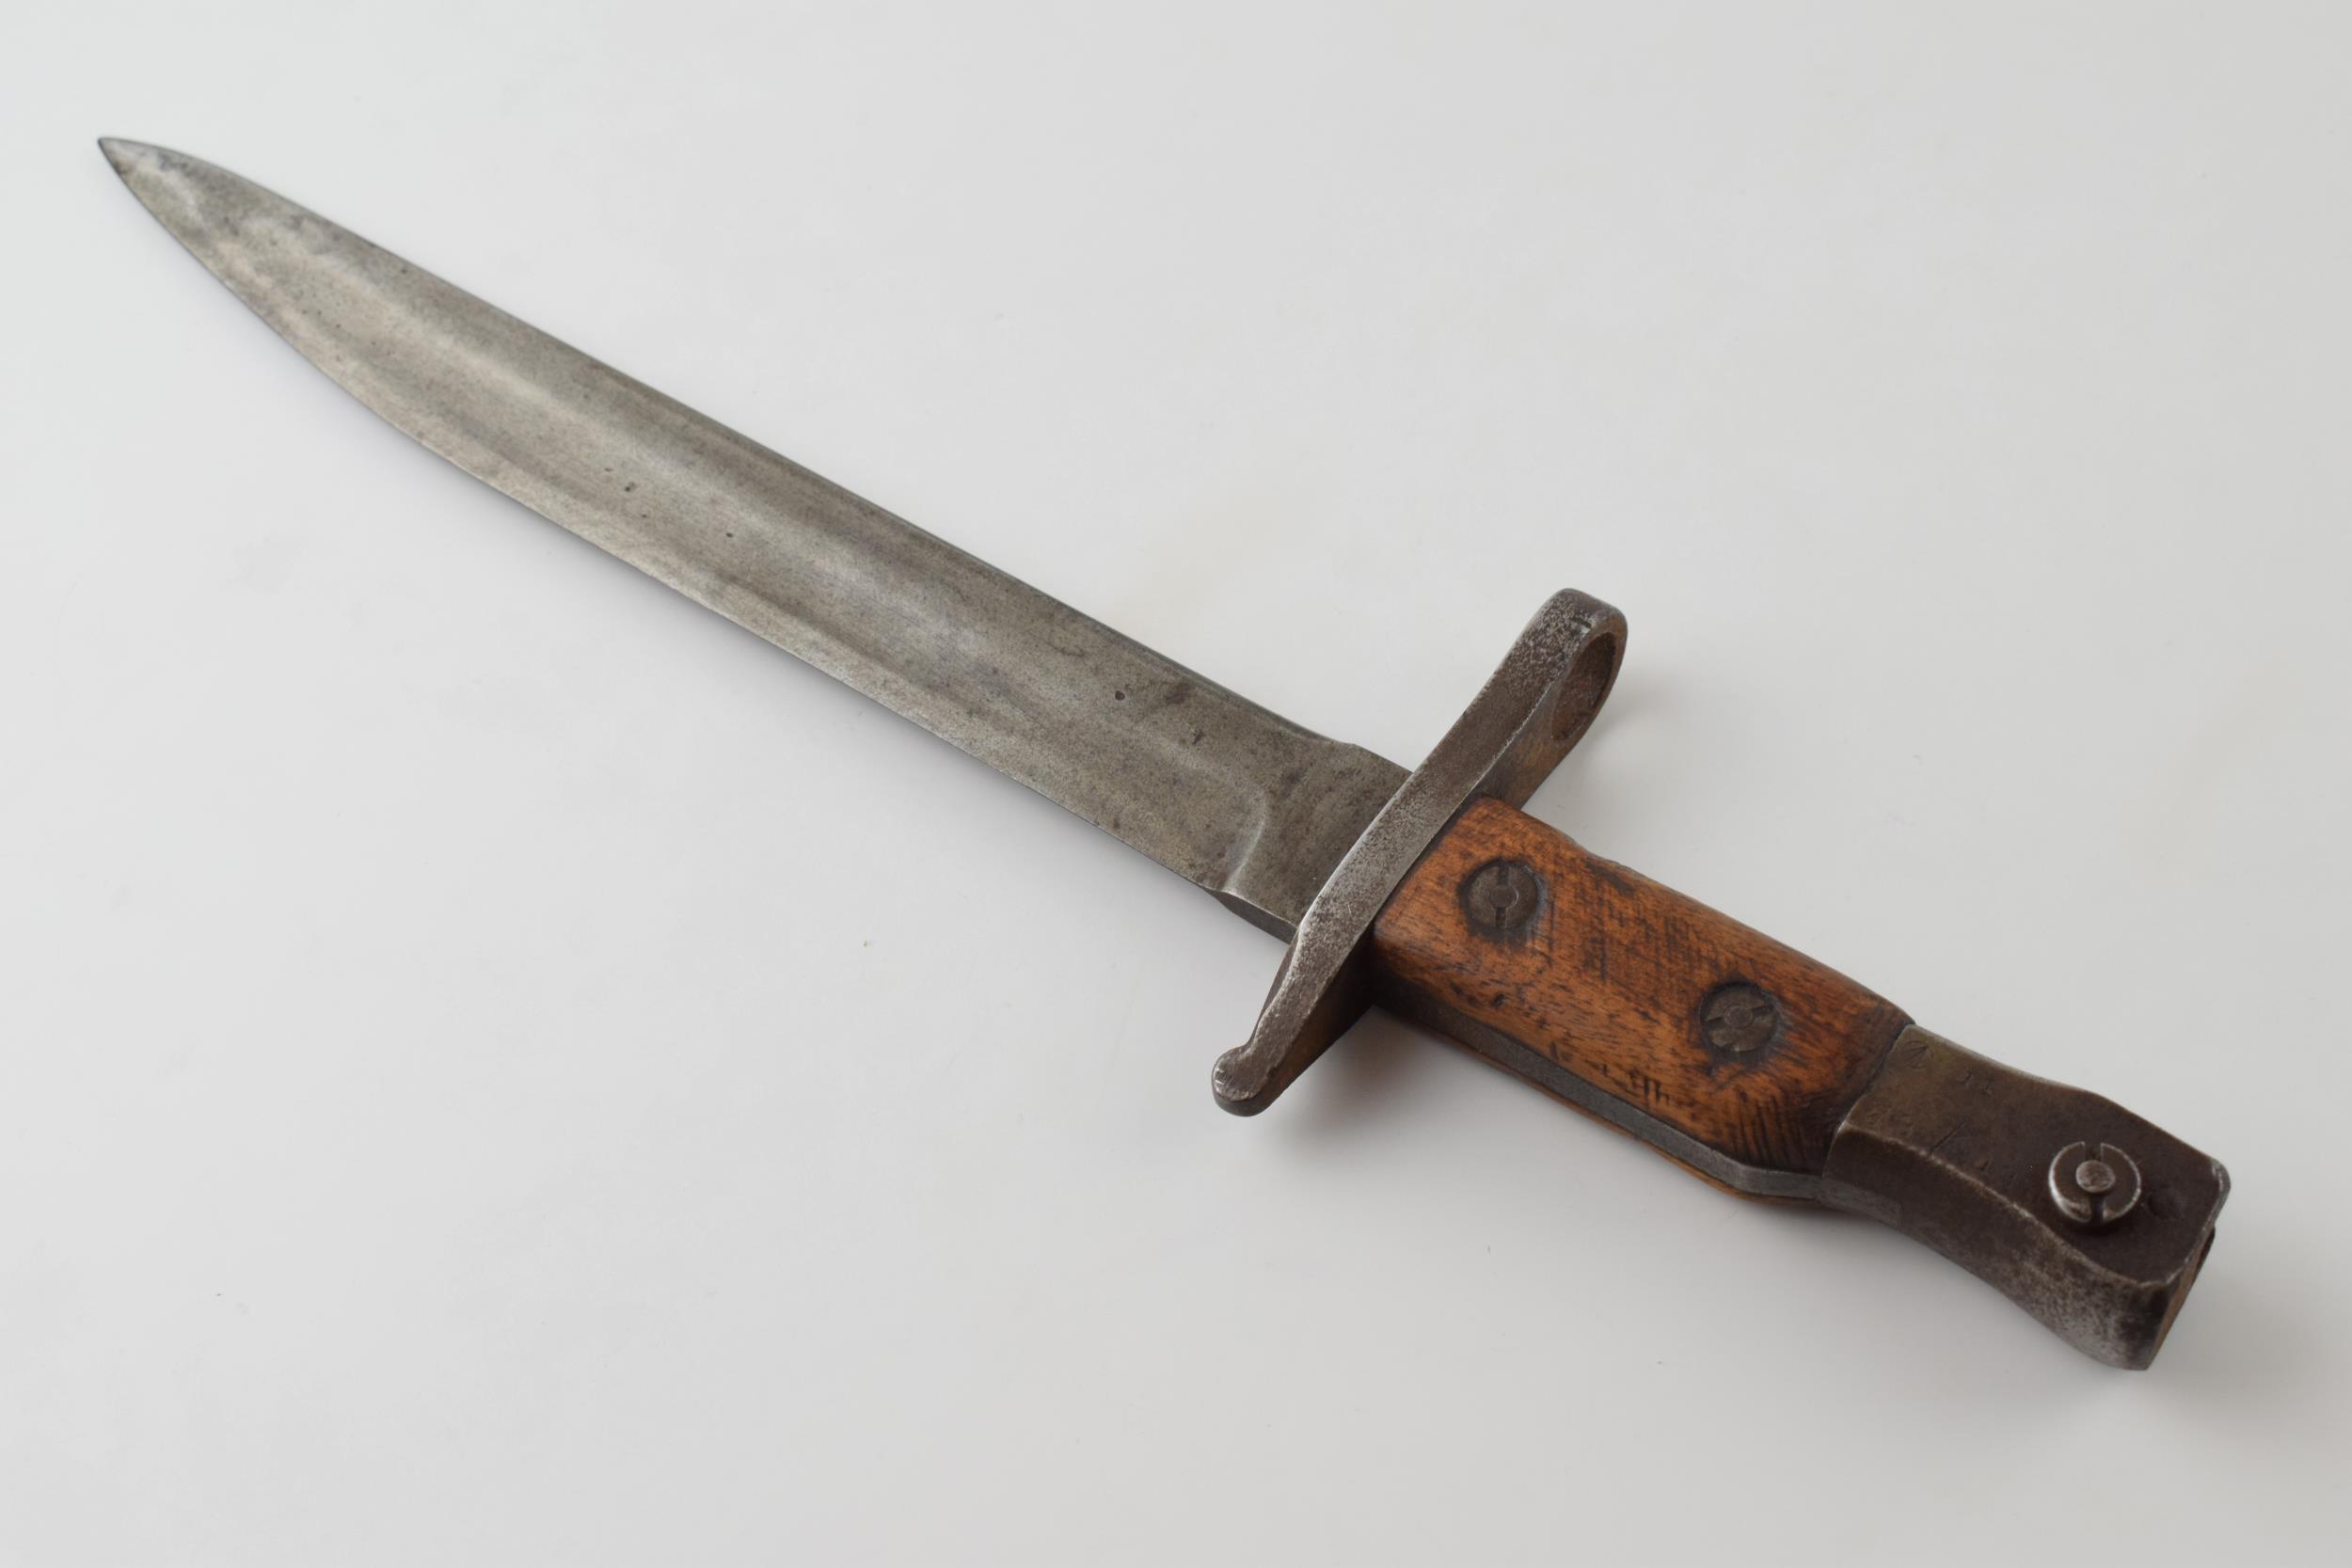 World War One bayonet by Ross Rifle Co, Quebec Canada, 1907 patent, 37cm long.